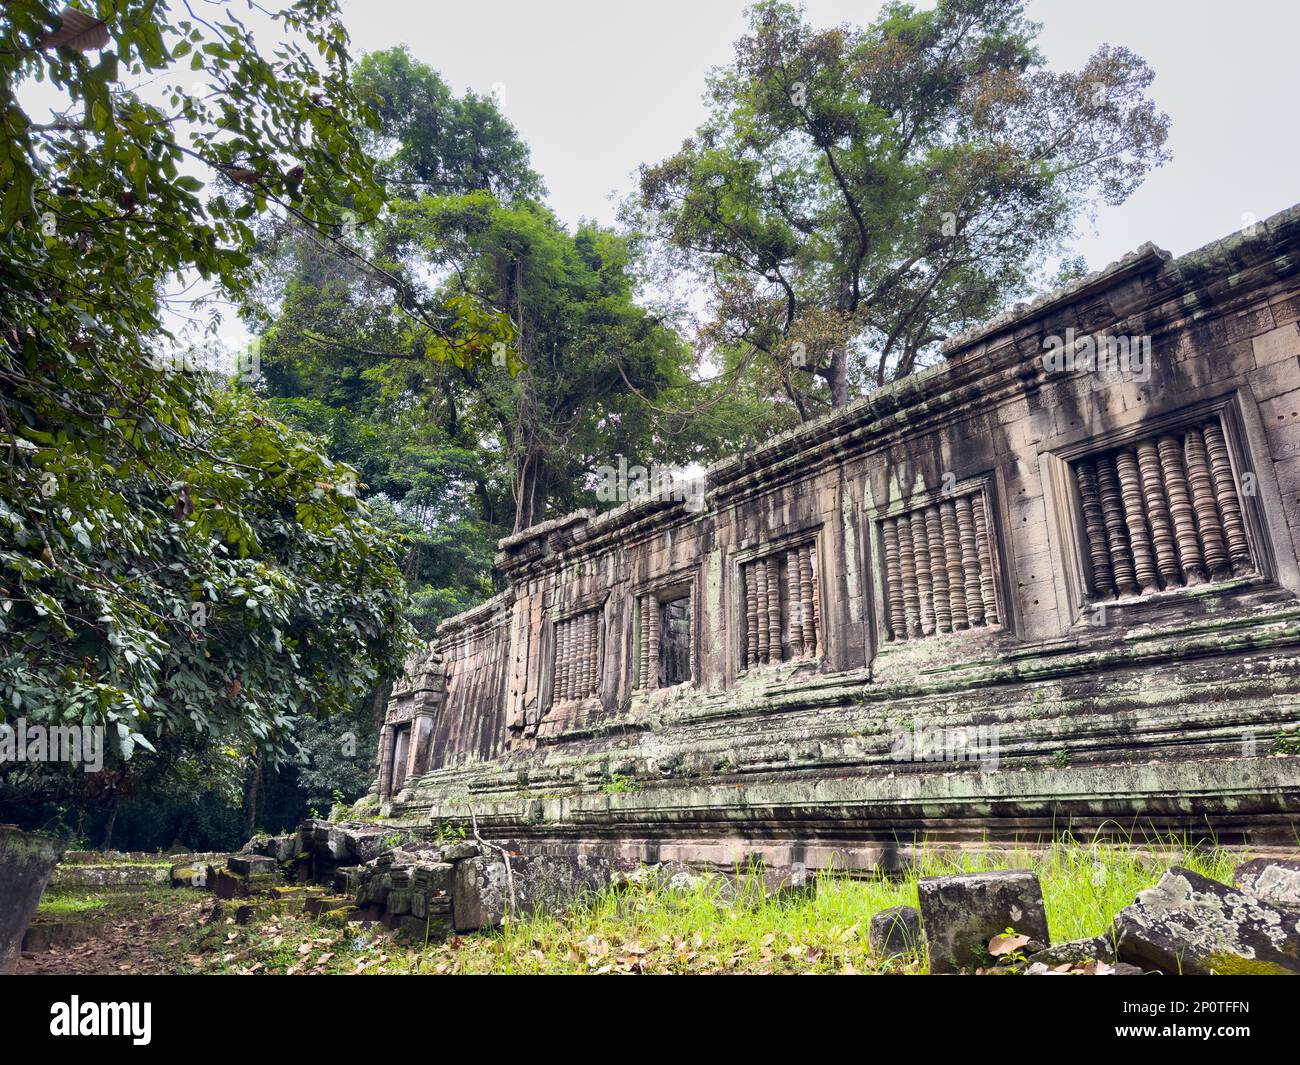 One of two Khleangs, or storerooms, behind the 12th century Prasat Suor Prat towers opposite the Elephant Terrace within Angkor Thom in Cambodia. Stock Photo